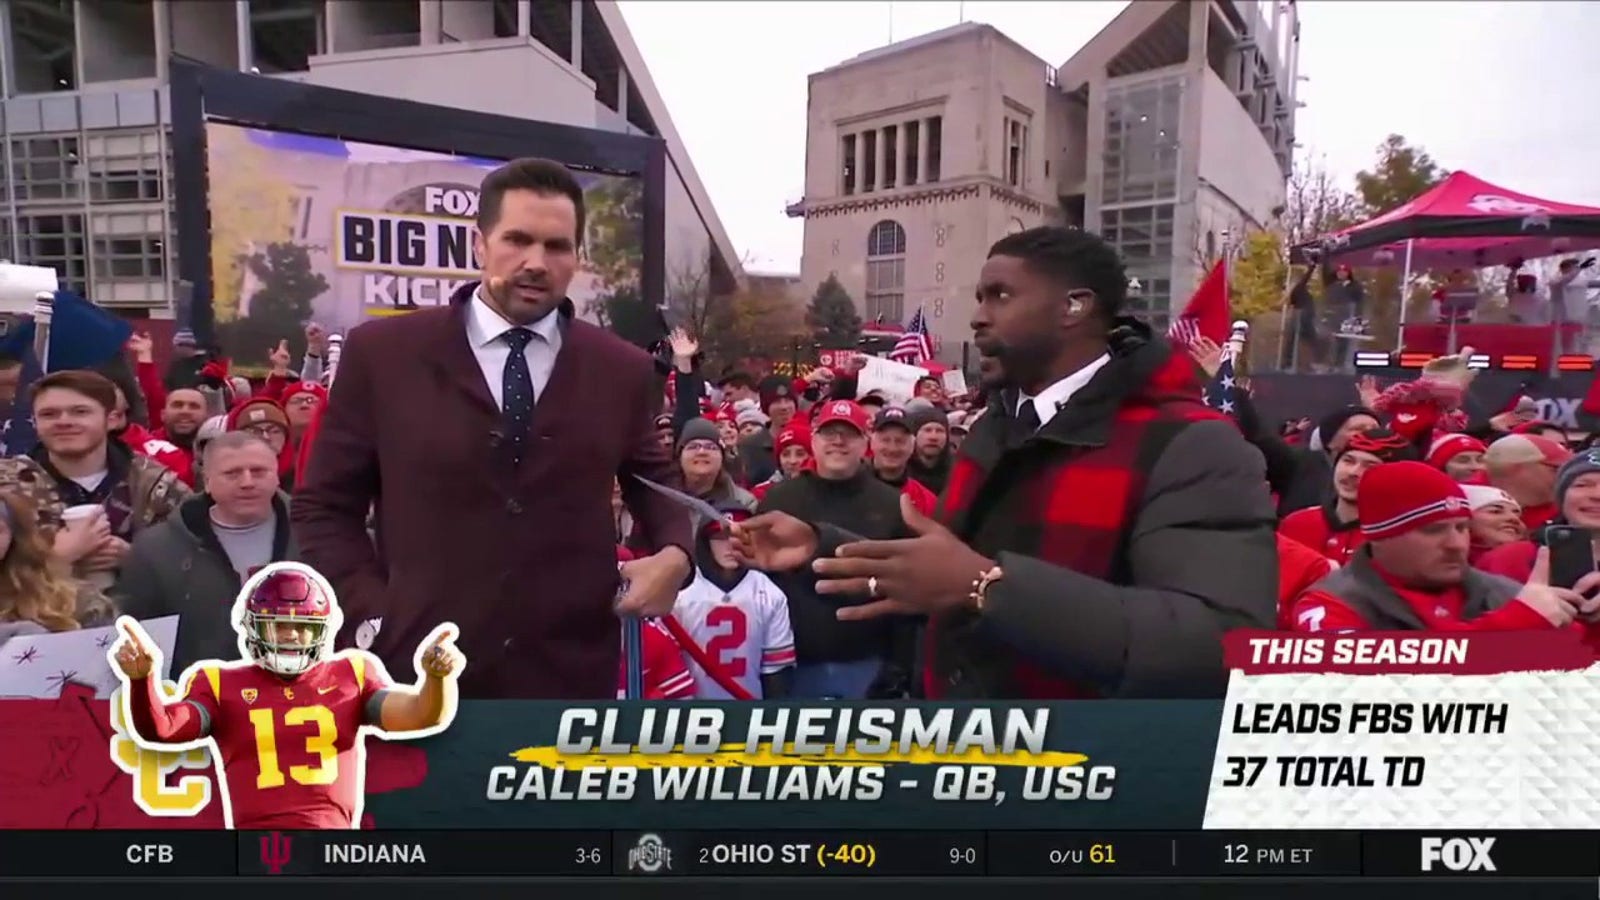 Caleb Williams for the Heisman Trophy?